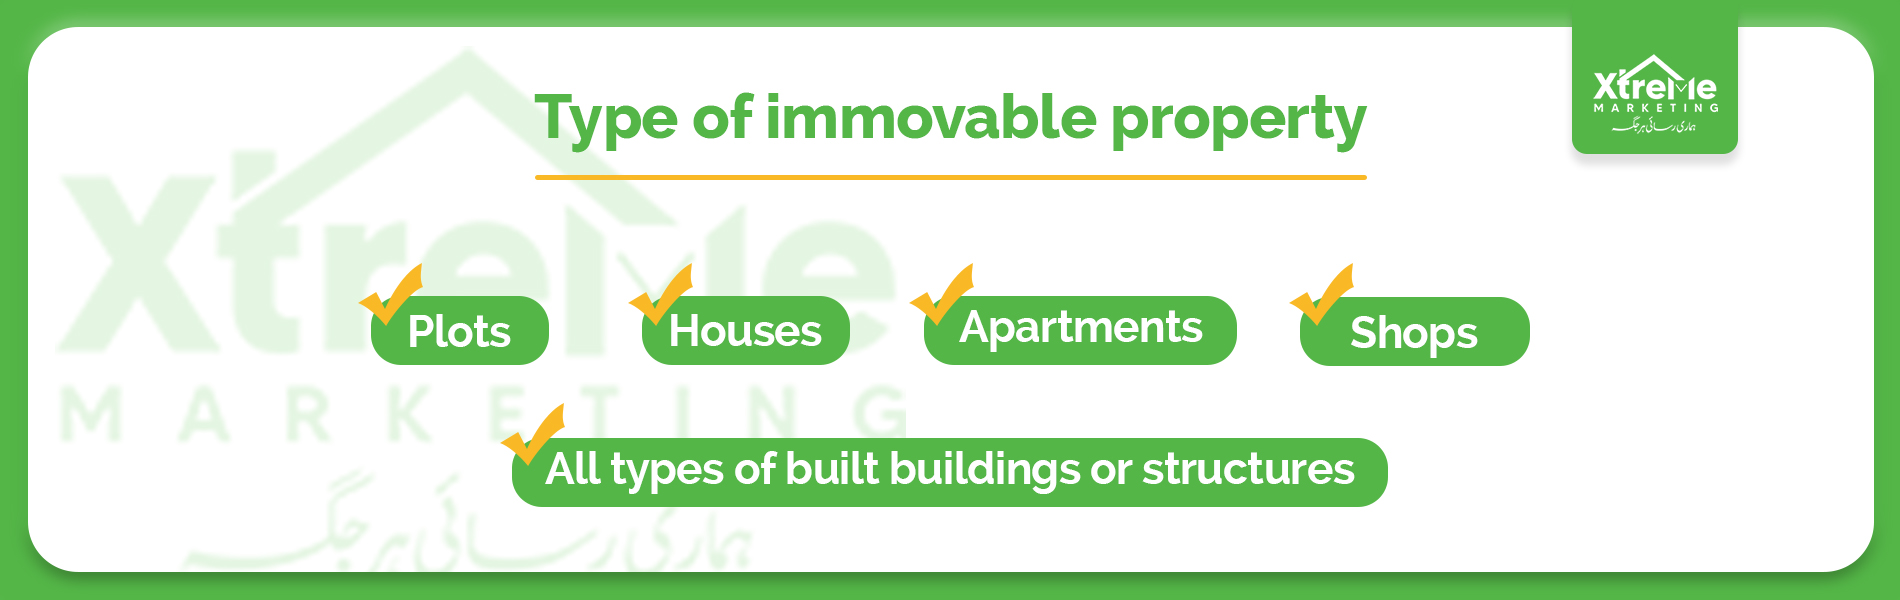 Type of immovable property